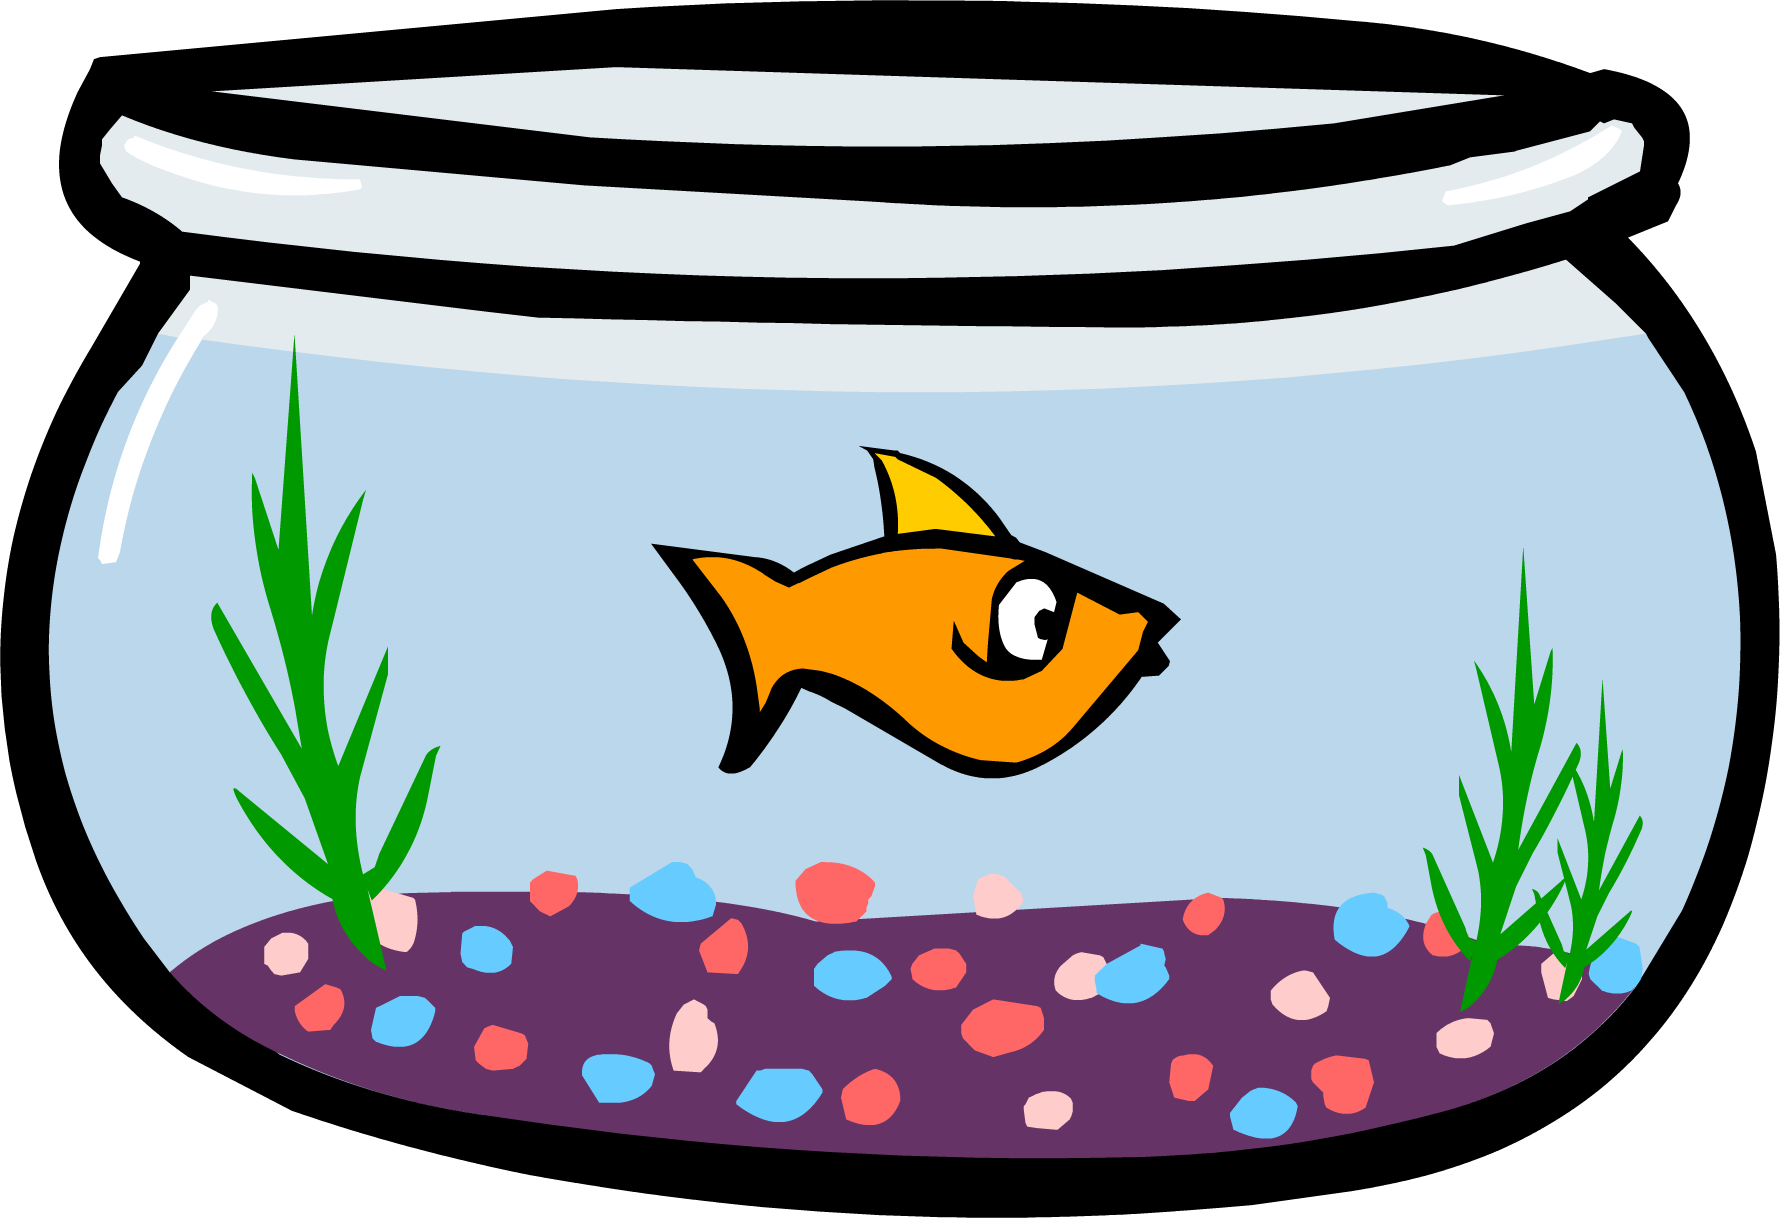 Image - Fish Bowl.PNG - Club Penguin Wiki - The free, editable